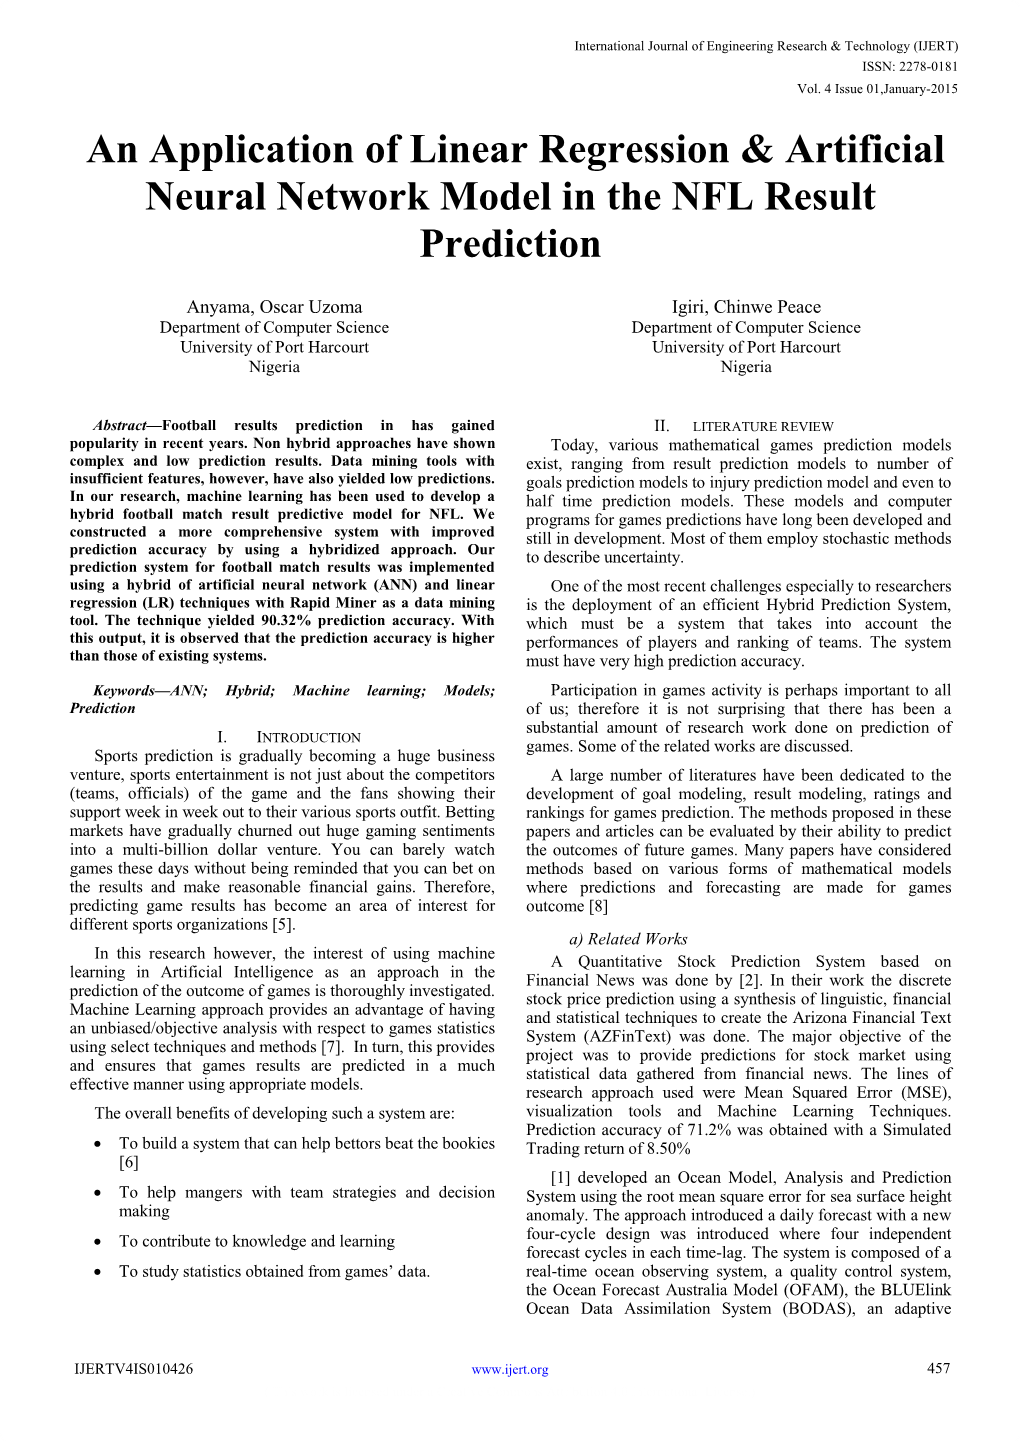 An Application of Linear Regression & Artificial Neural Network Model In